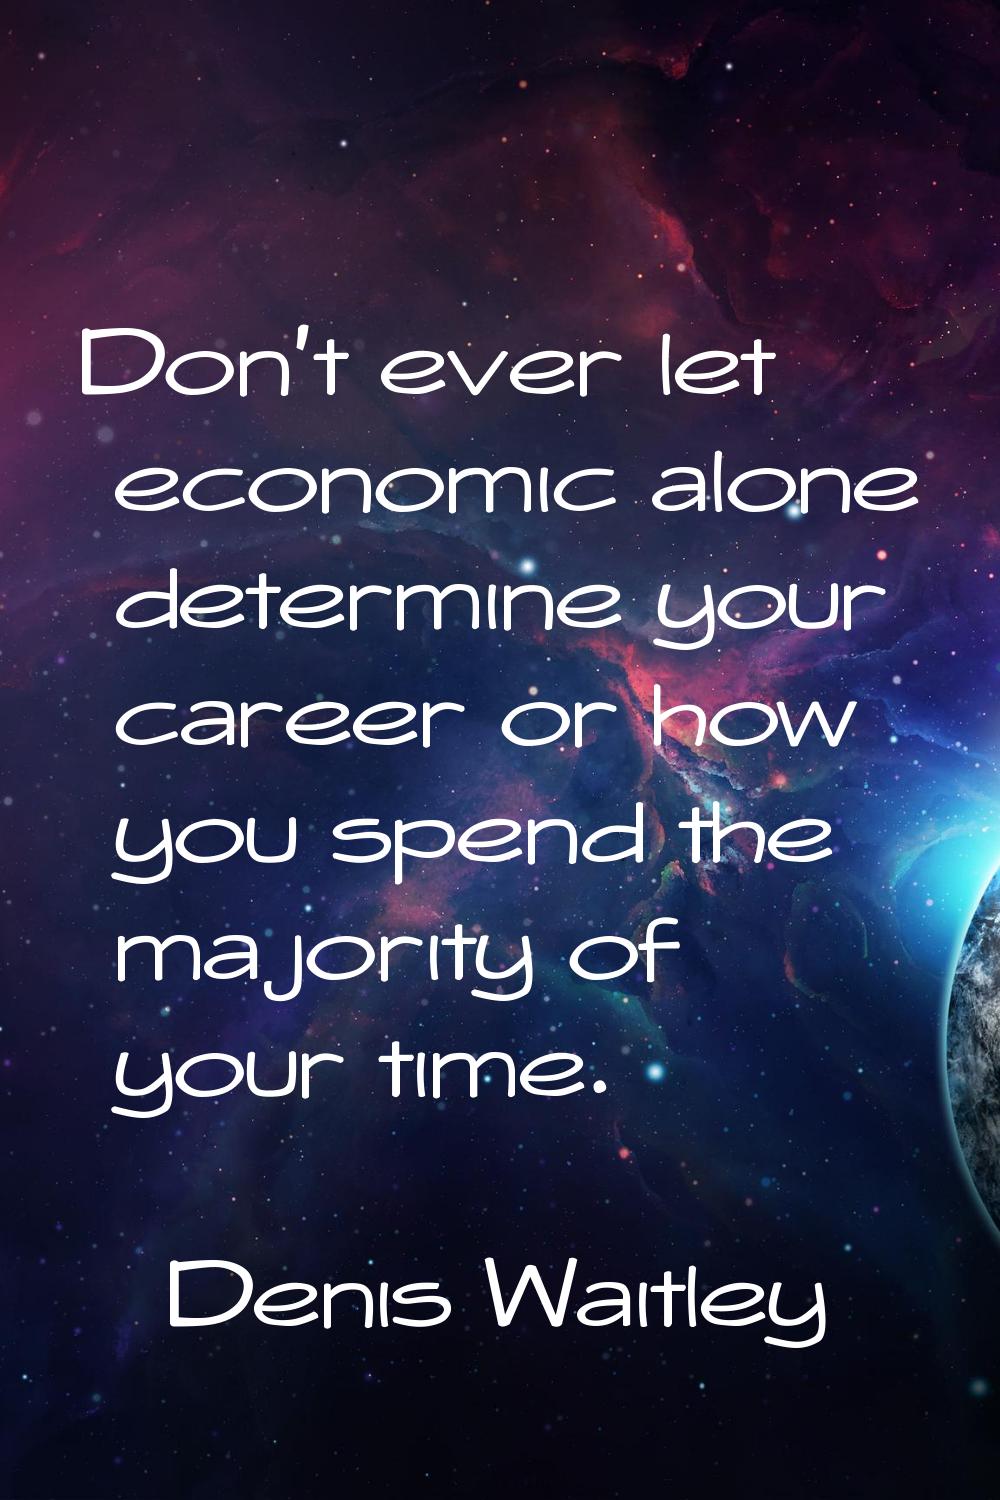 Don't ever let economic alone determine your career or how you spend the majority of your time.